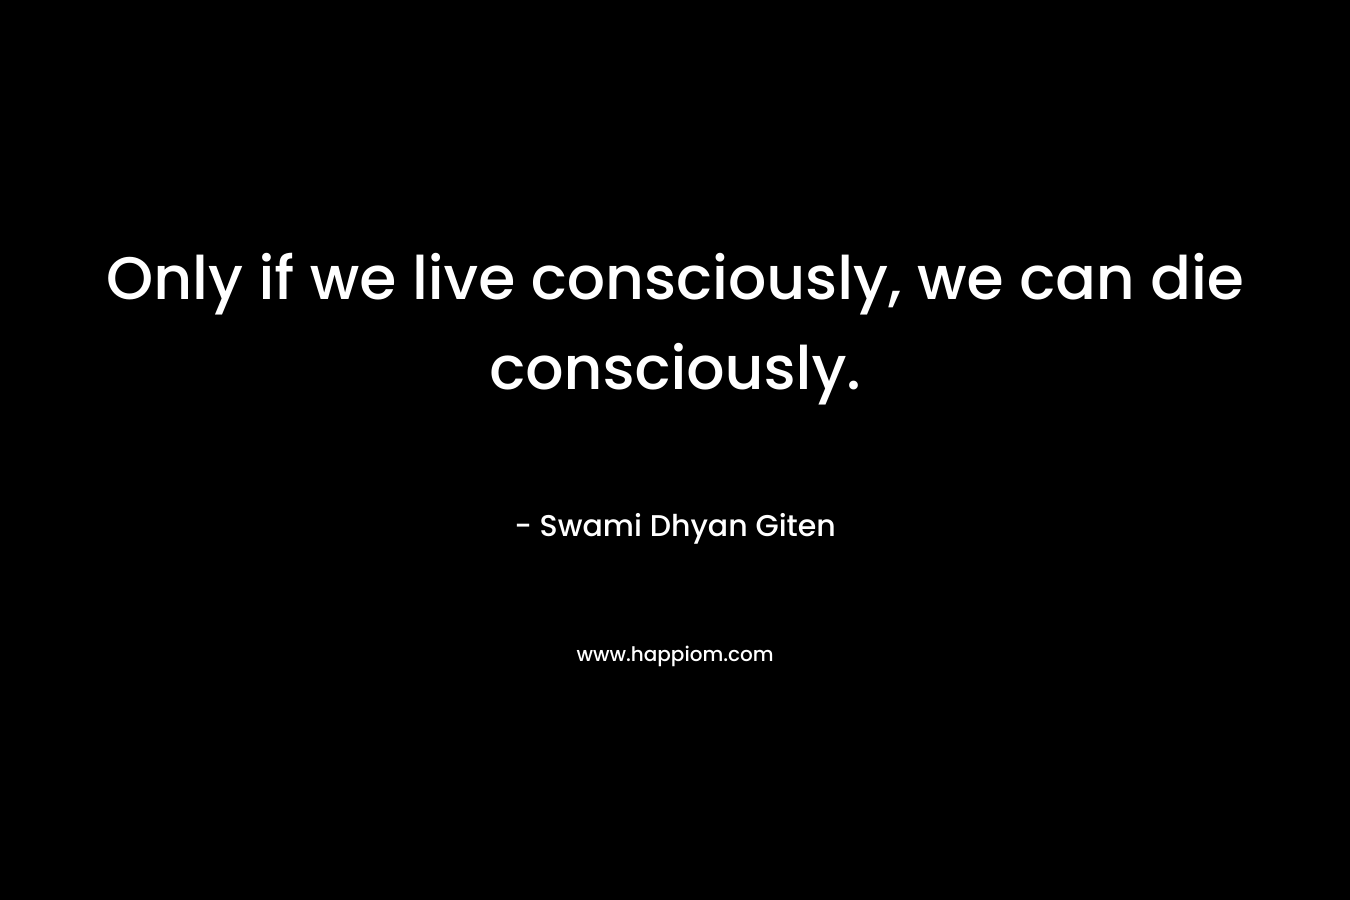 Only if we live consciously, we can die consciously.